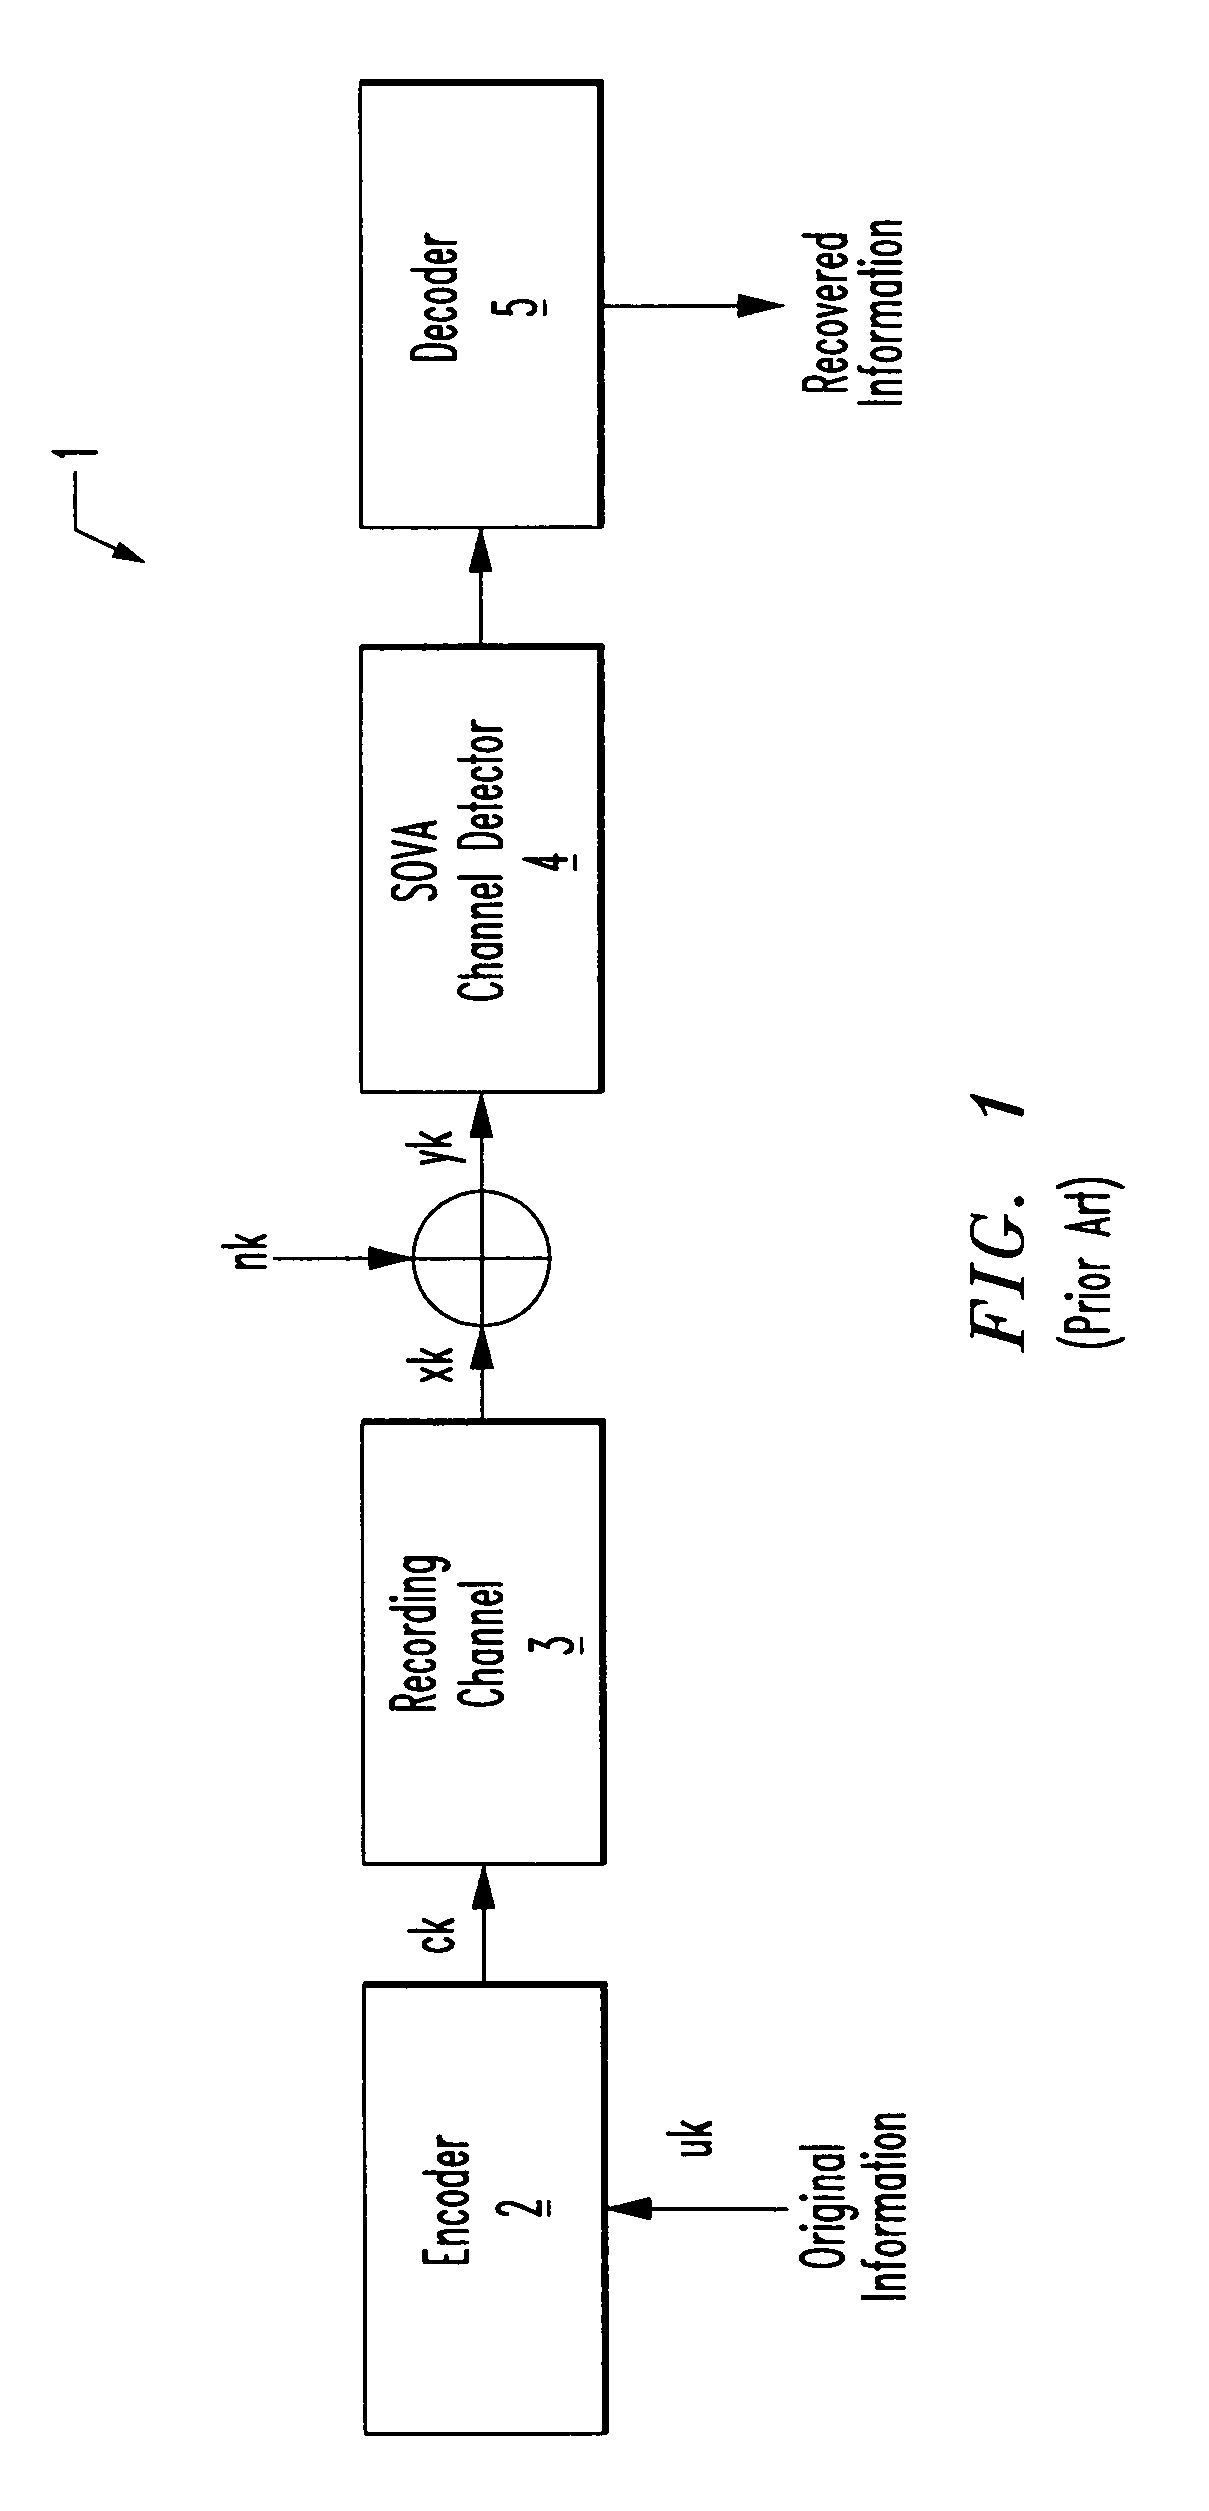 Systems and methods for error reduction associated with information transfer